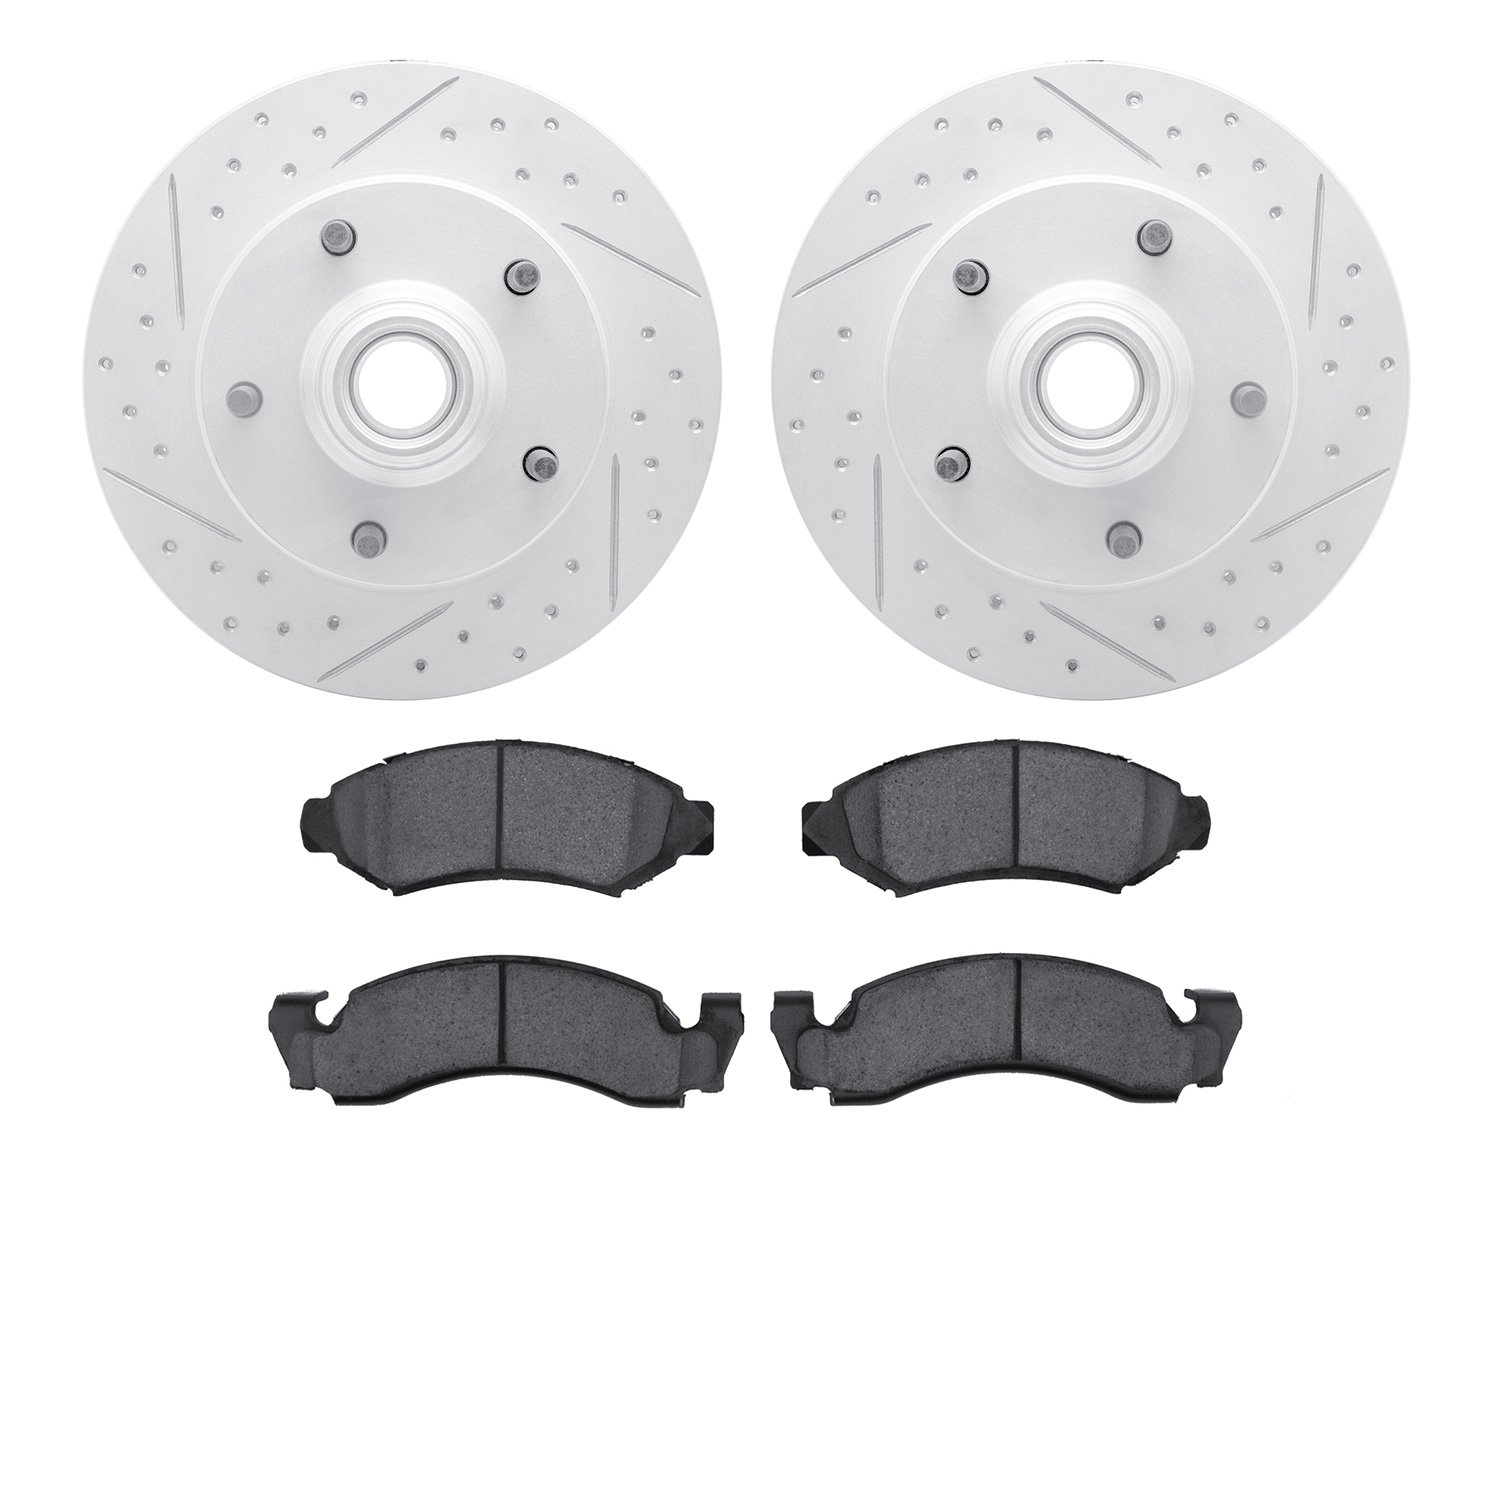 2402-54002 Geoperformance Drilled/Slotted Brake Rotors with Ultimate-Duty Brake Pads Kit, 1973-1985 Ford/Lincoln/Mercury/Mazda,